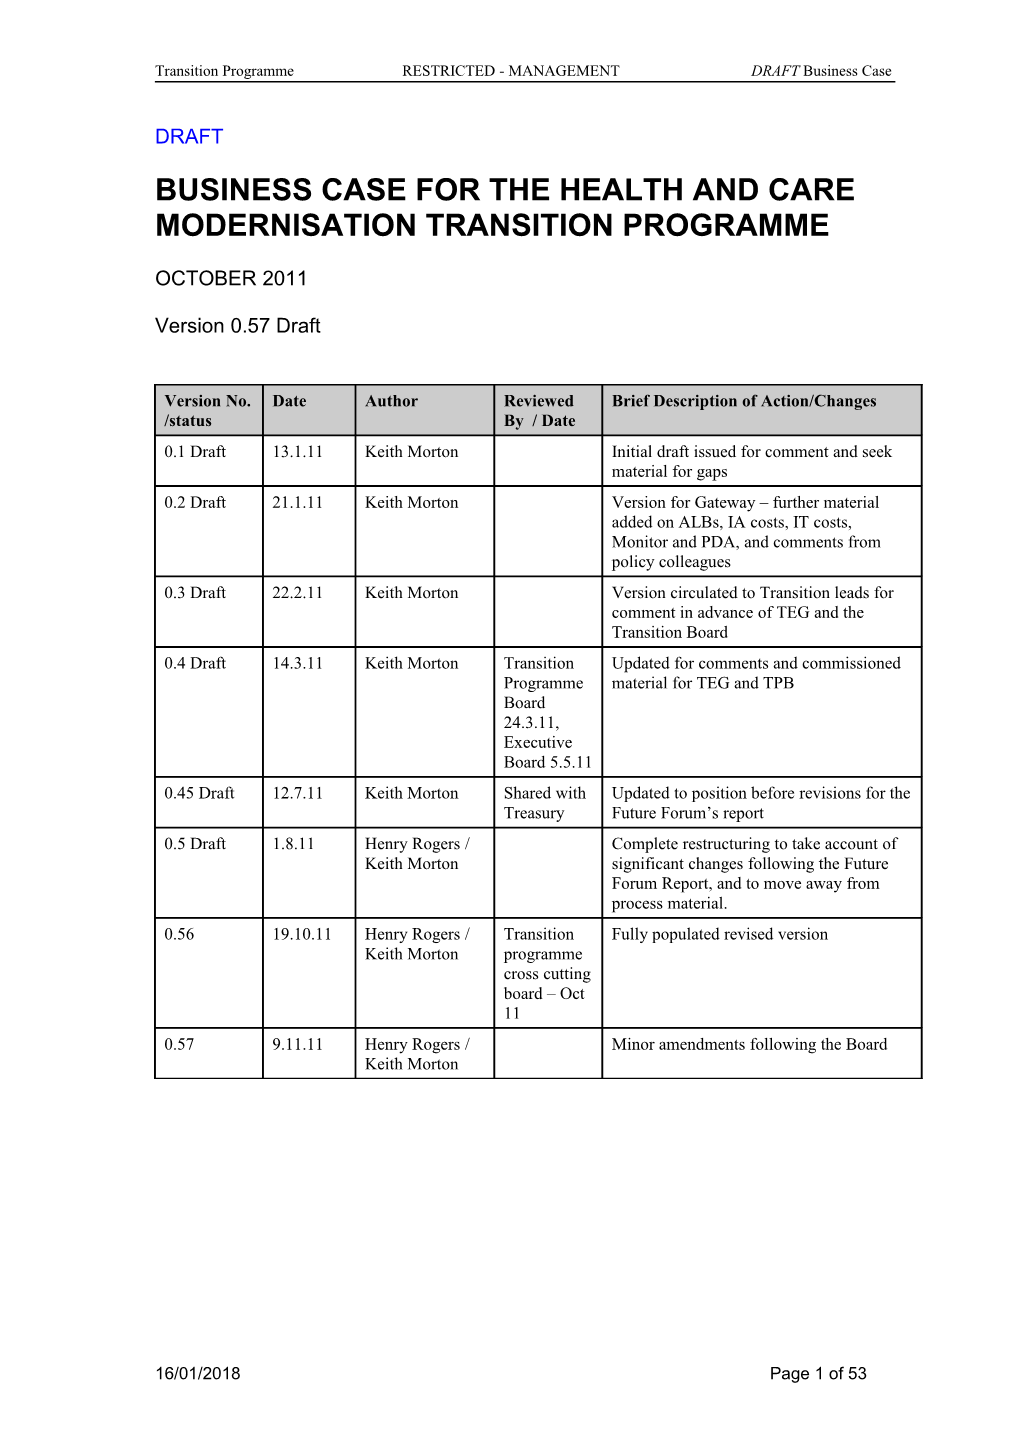 Business Case for the Health and Care Modernisation Transition Programme